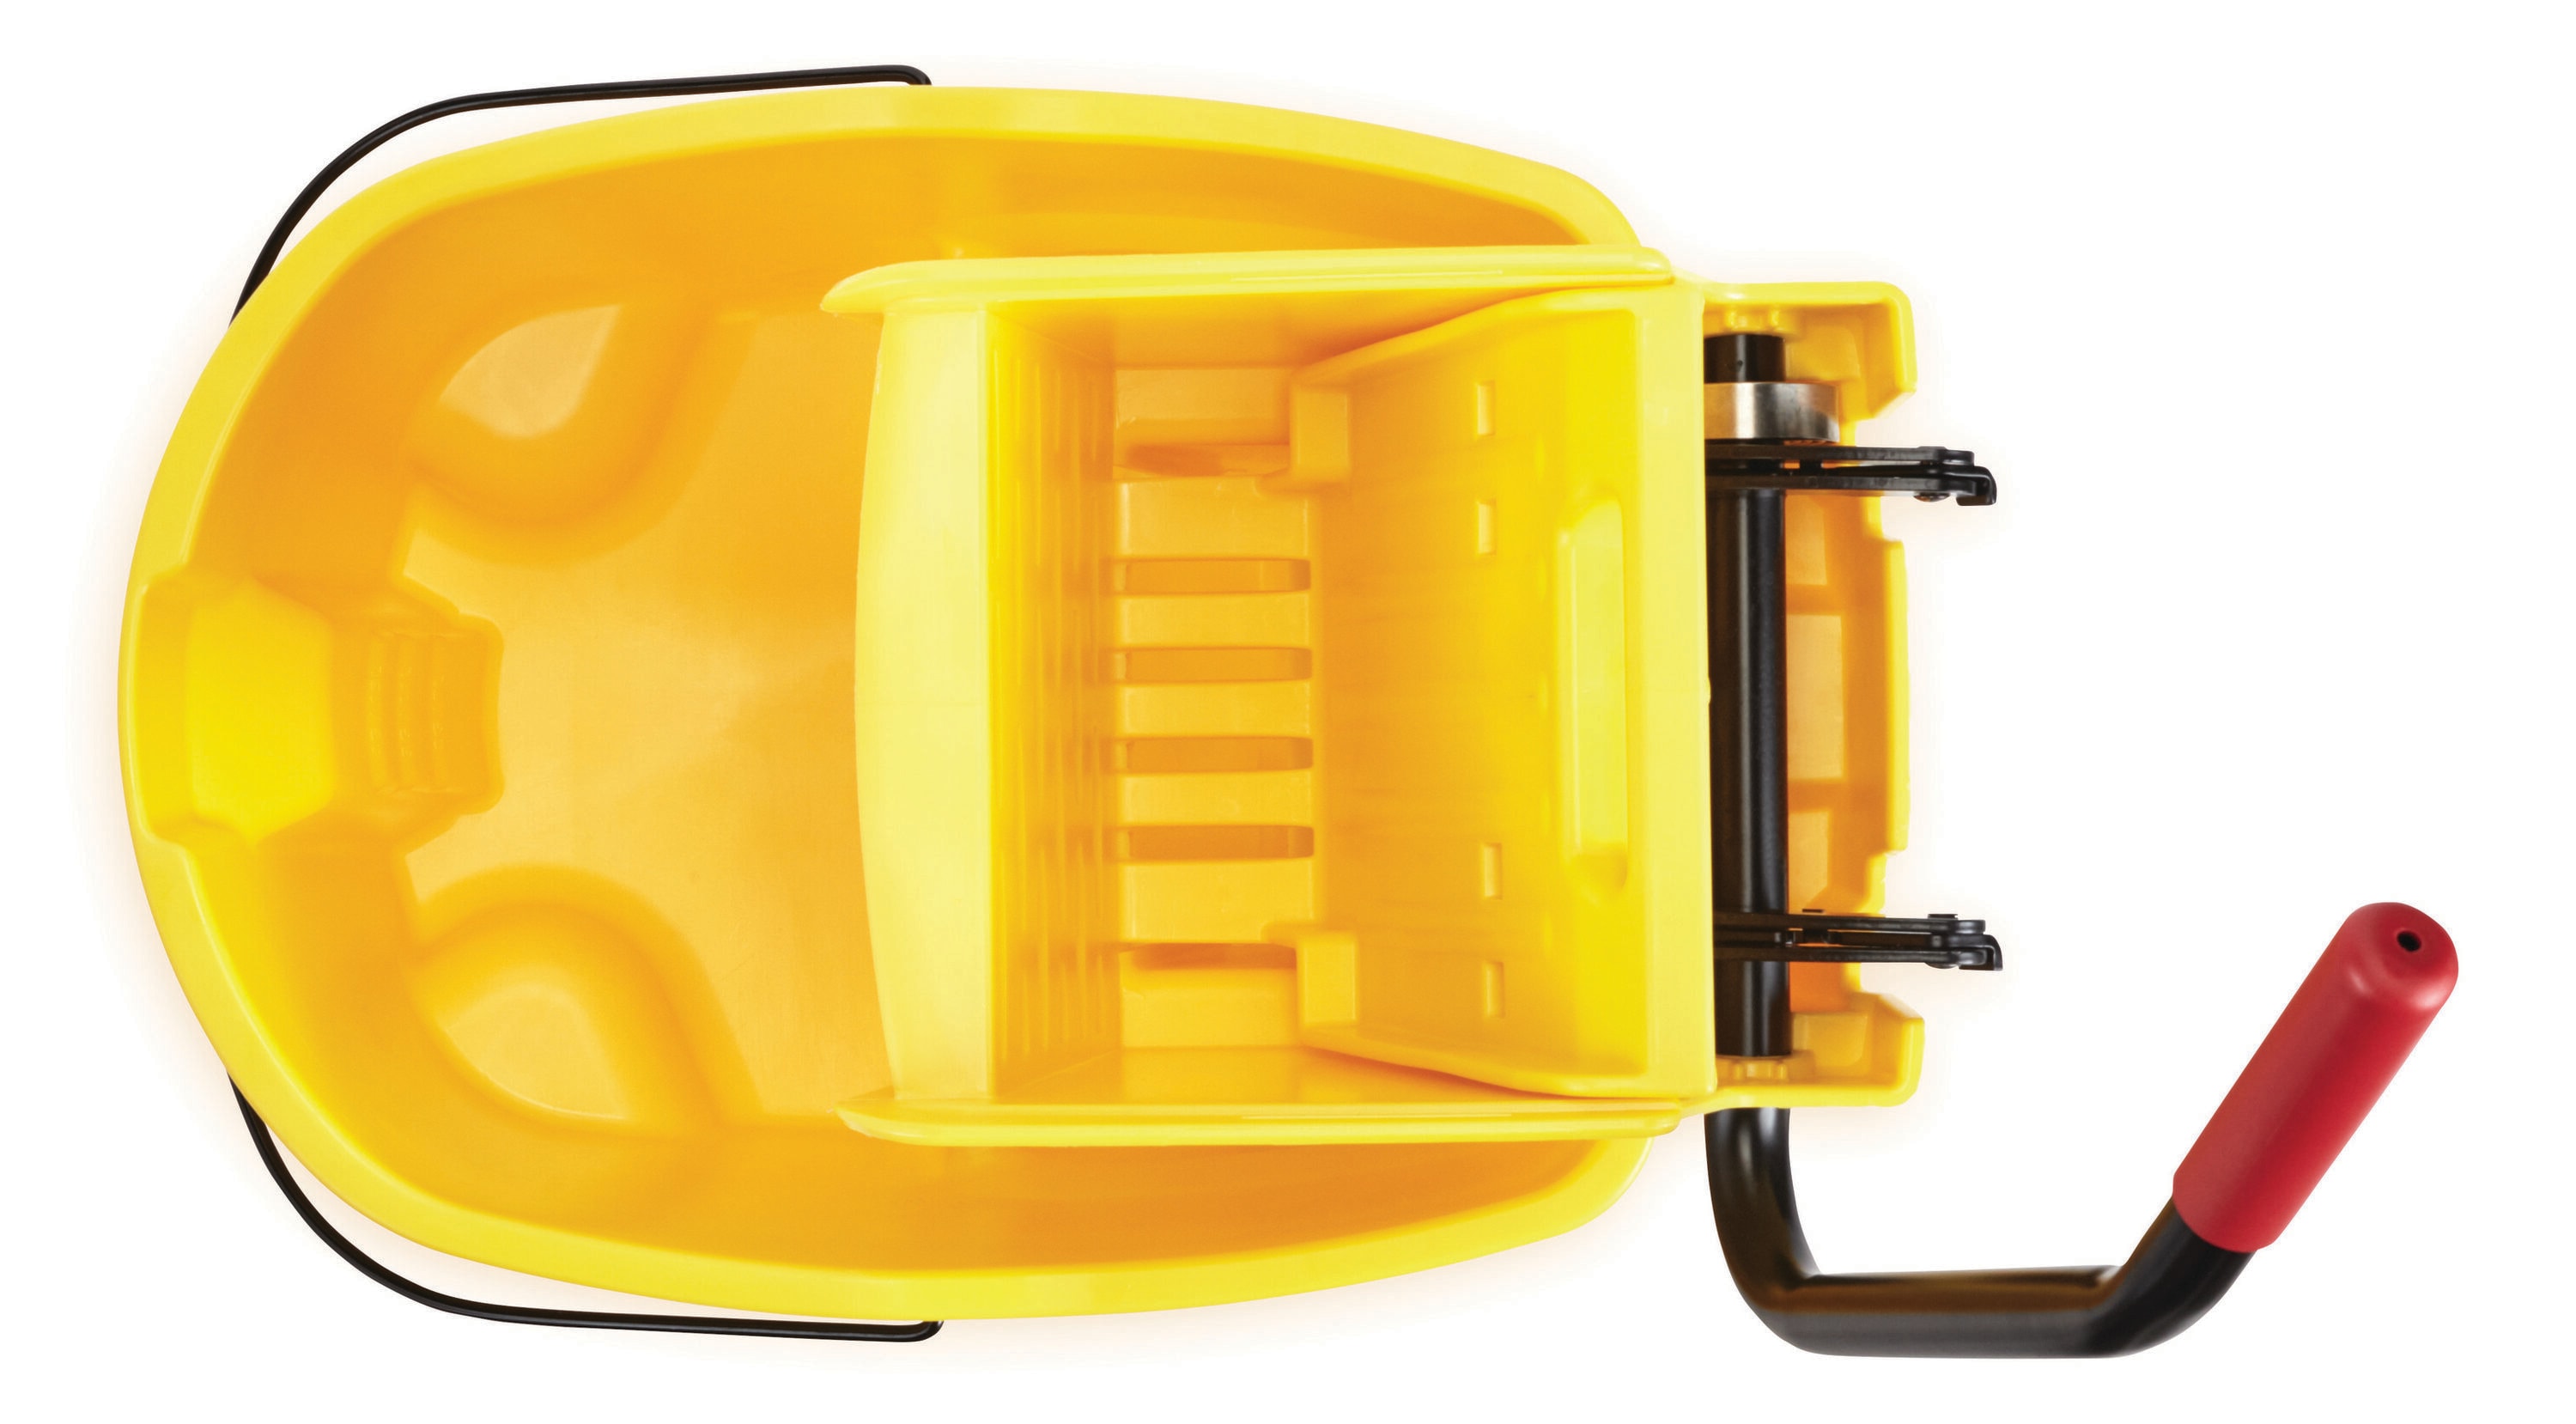 Impact 35-Quart Plastic General Bucket with Wheels in the Mop Wringer  Buckets department at